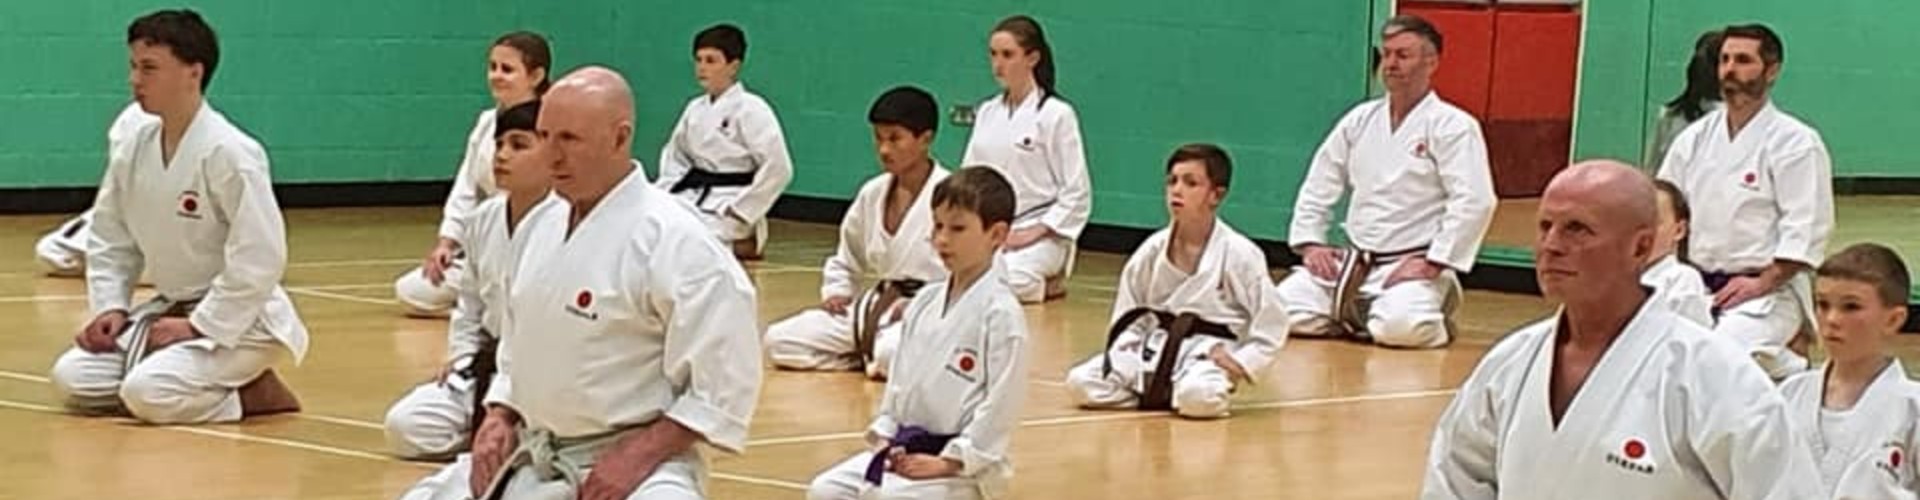 Children and adults in kneeling Karate pose